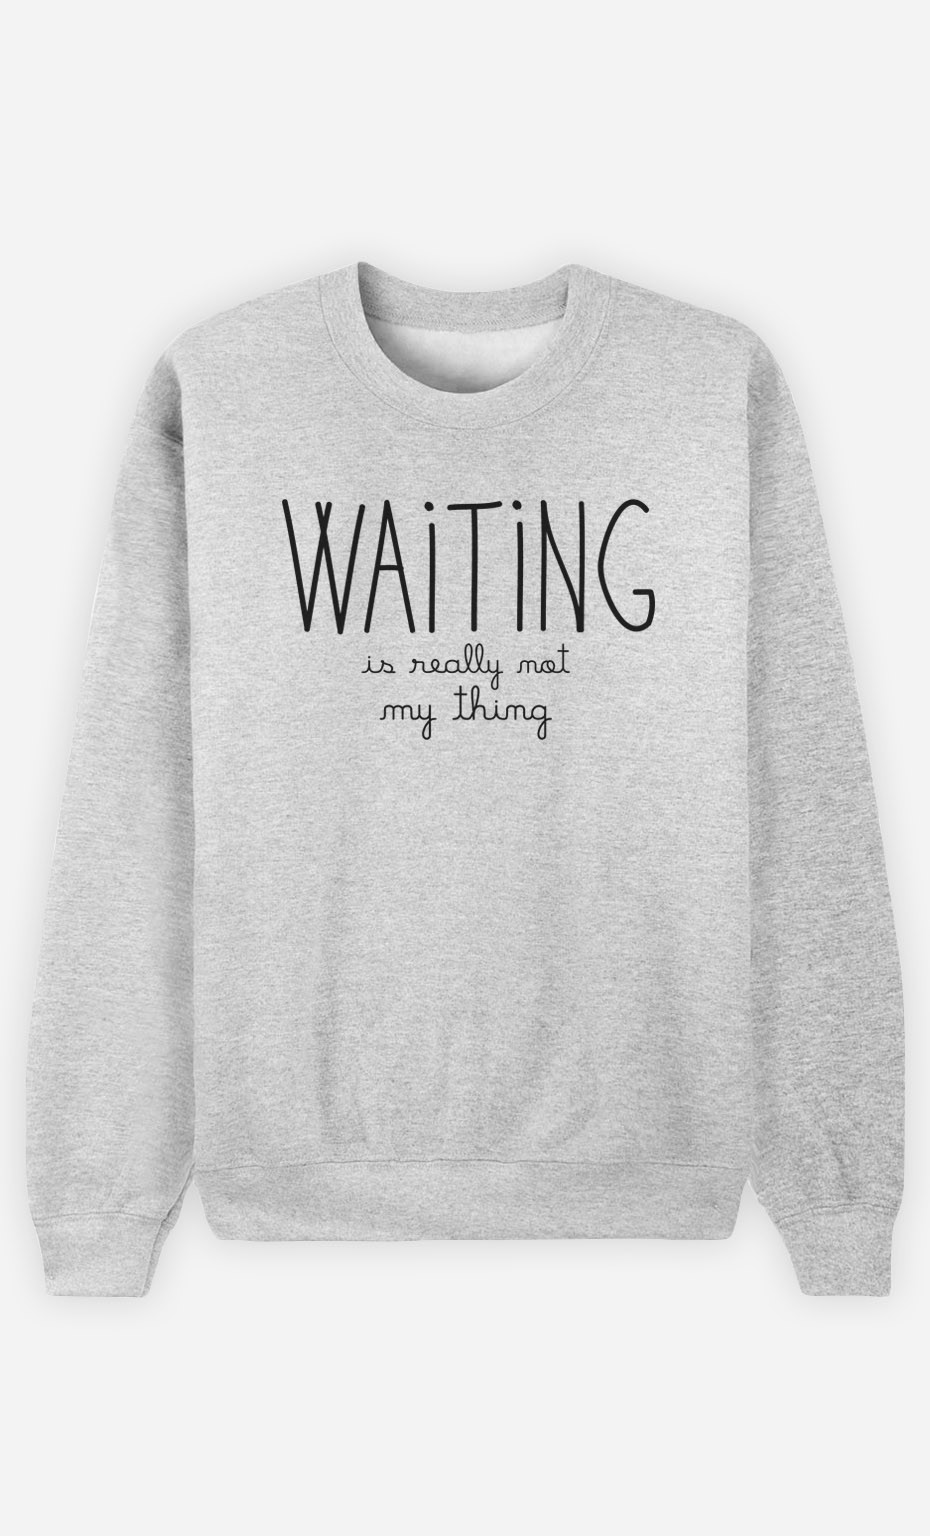 Sweatshirt Waiting is Really Not my Thing